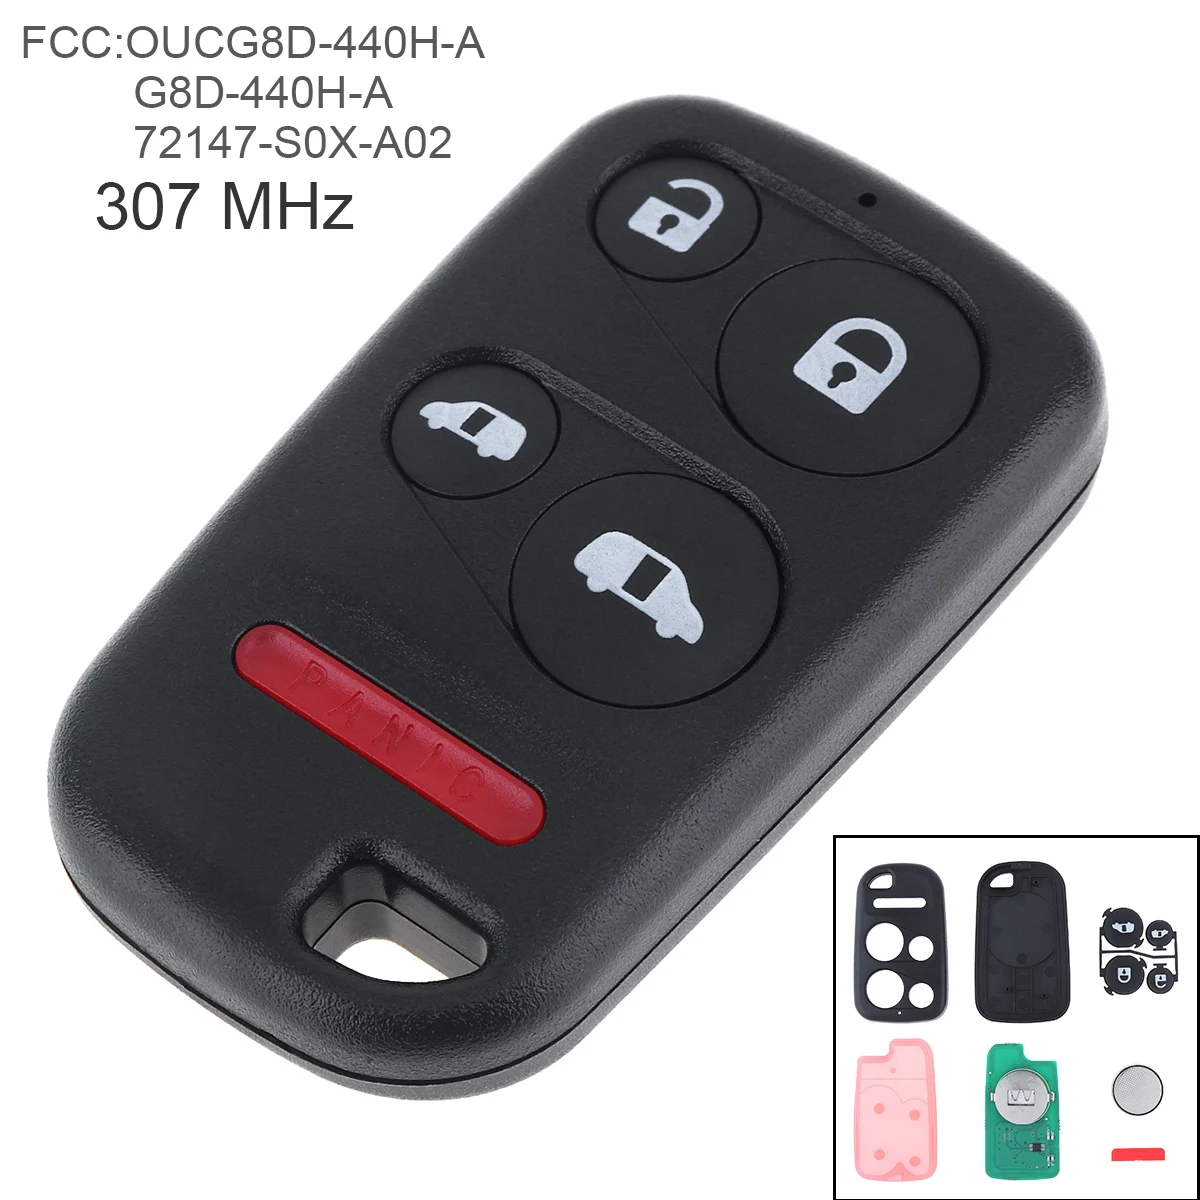 

5 Buttons 307MHz Keyless Remote Key Fob ID46 Chip OUCG8D-440H-A G8D-440H-A 72147-S0X-A02 for 2001 2002 2003 2004 Honda Odyssey